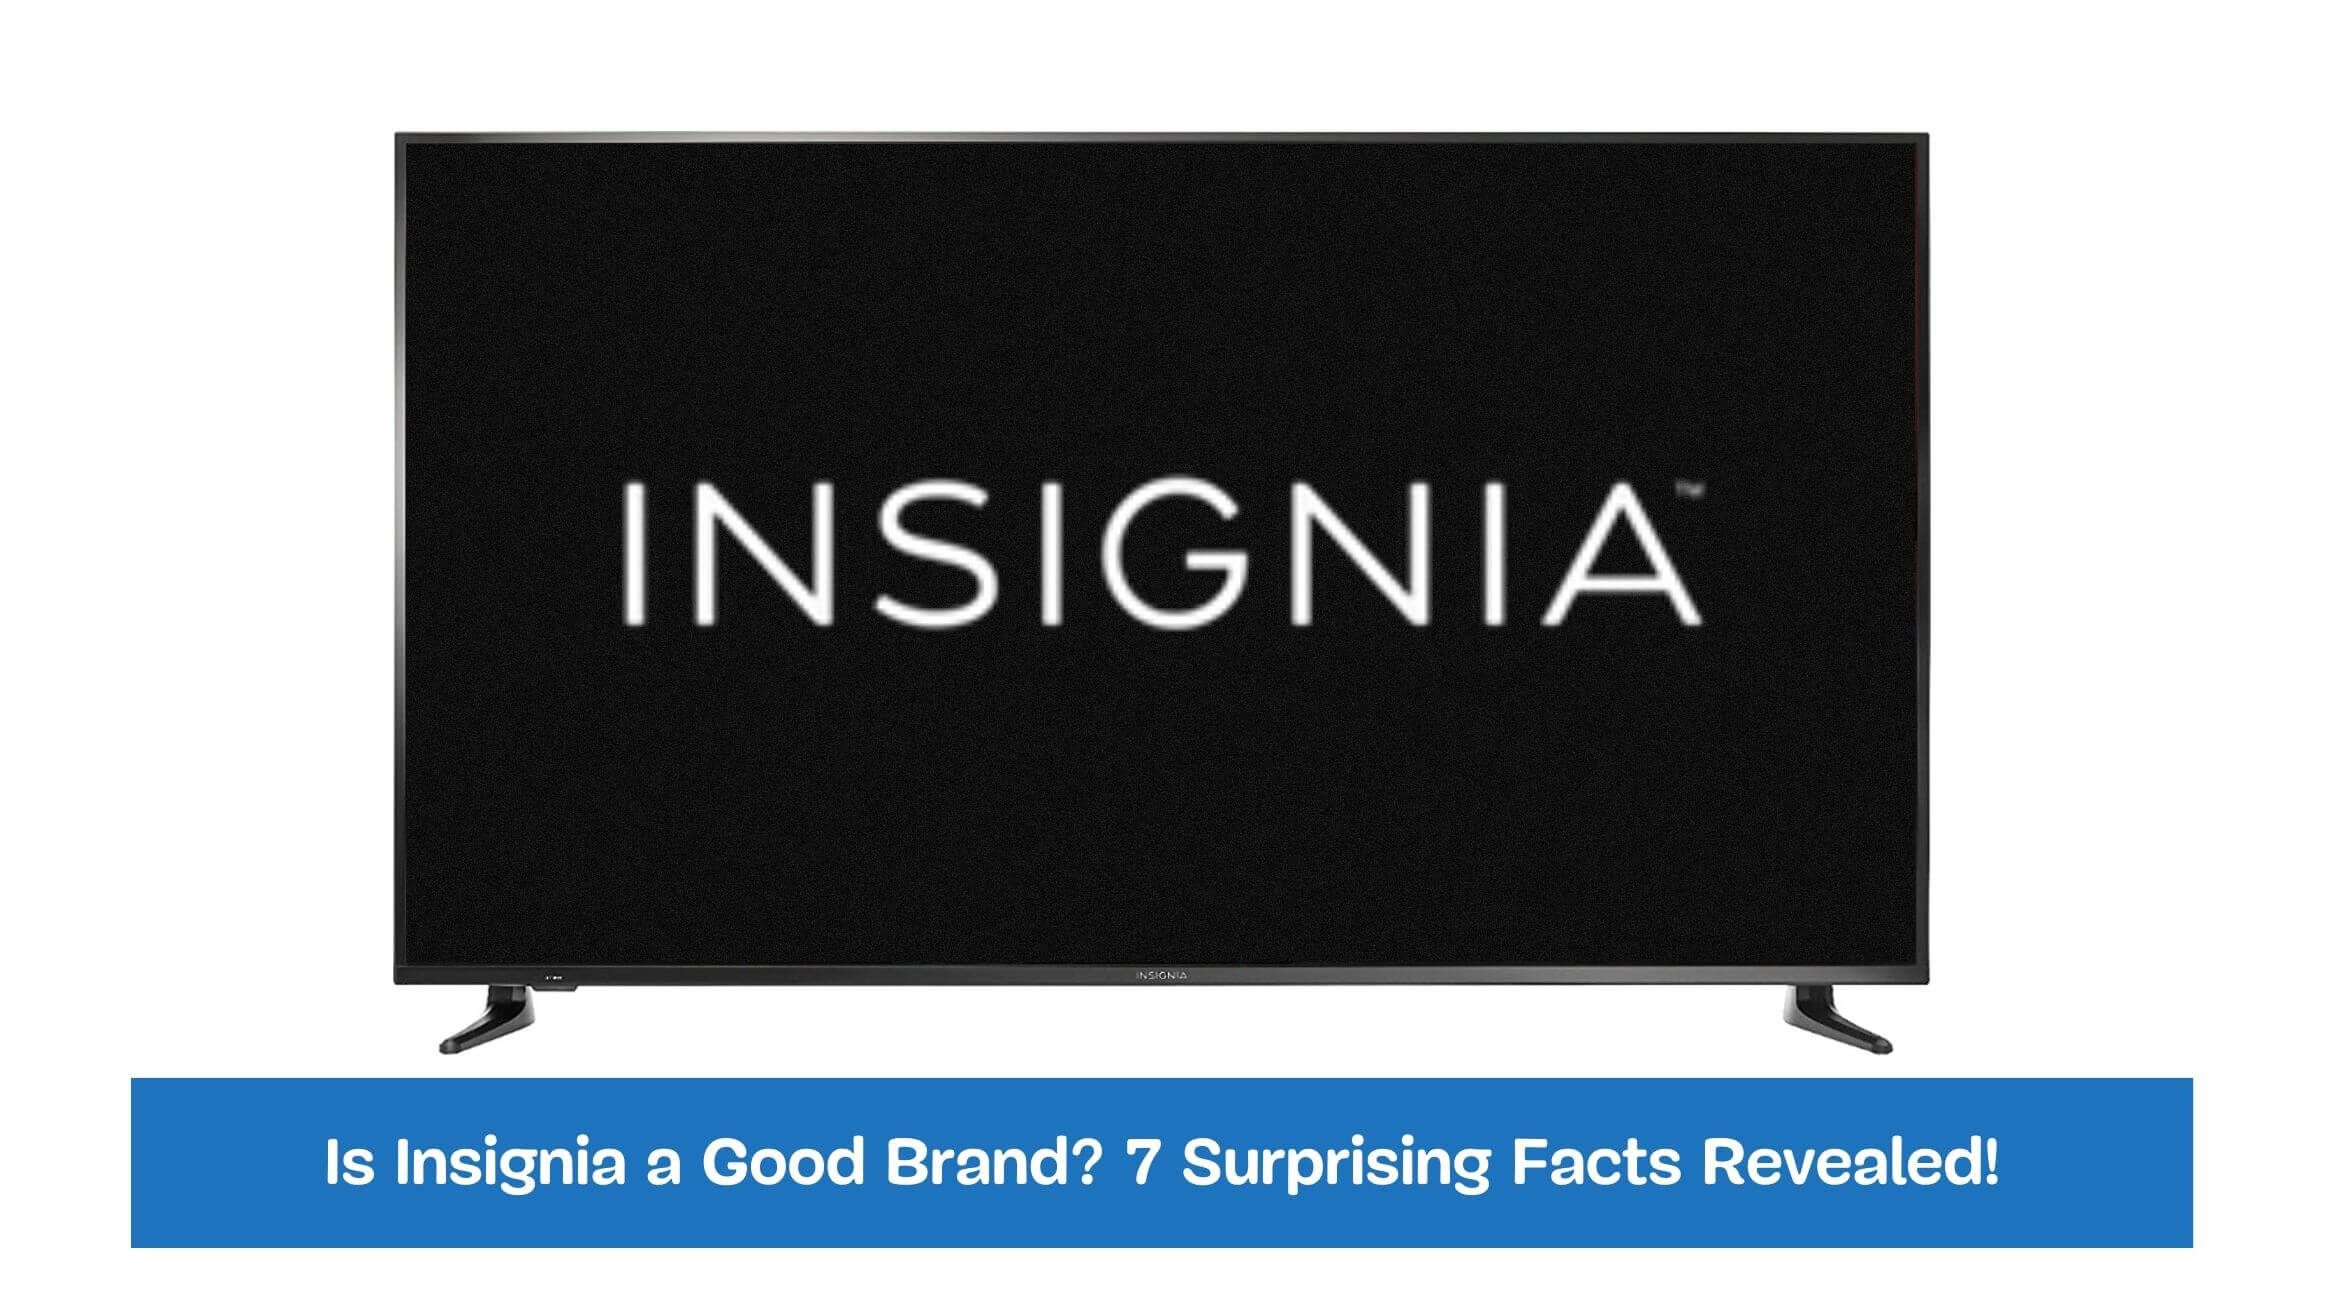 Is Insignia a Good Brand 7 Surprising Facts Revealed!